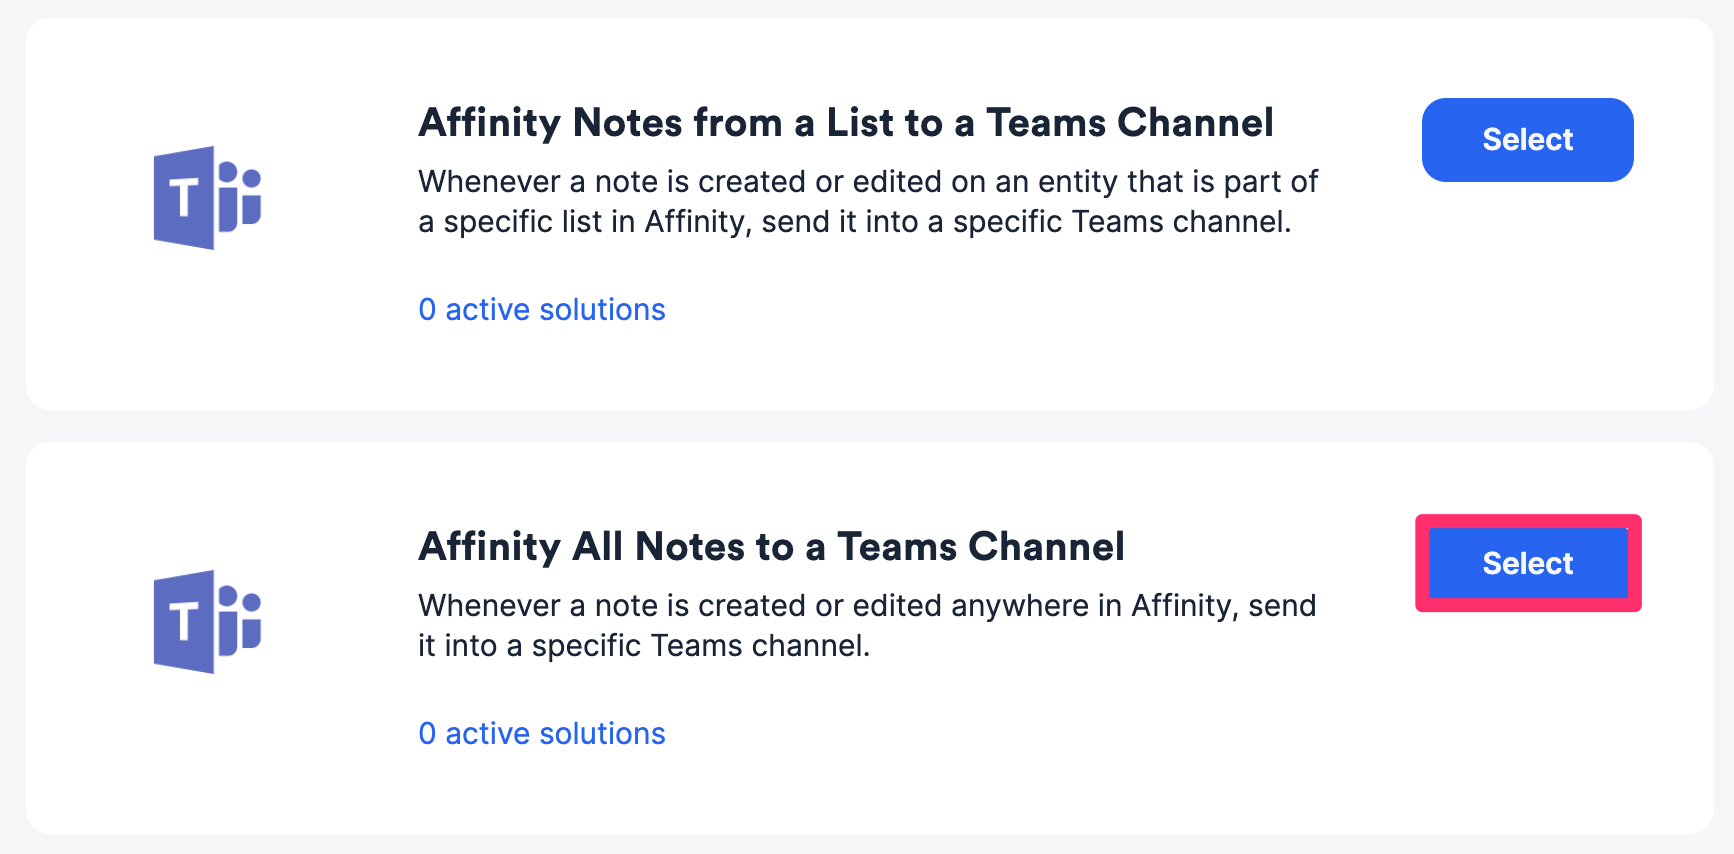 Affinity_All_Notes_to_a_Teams_Channel.png